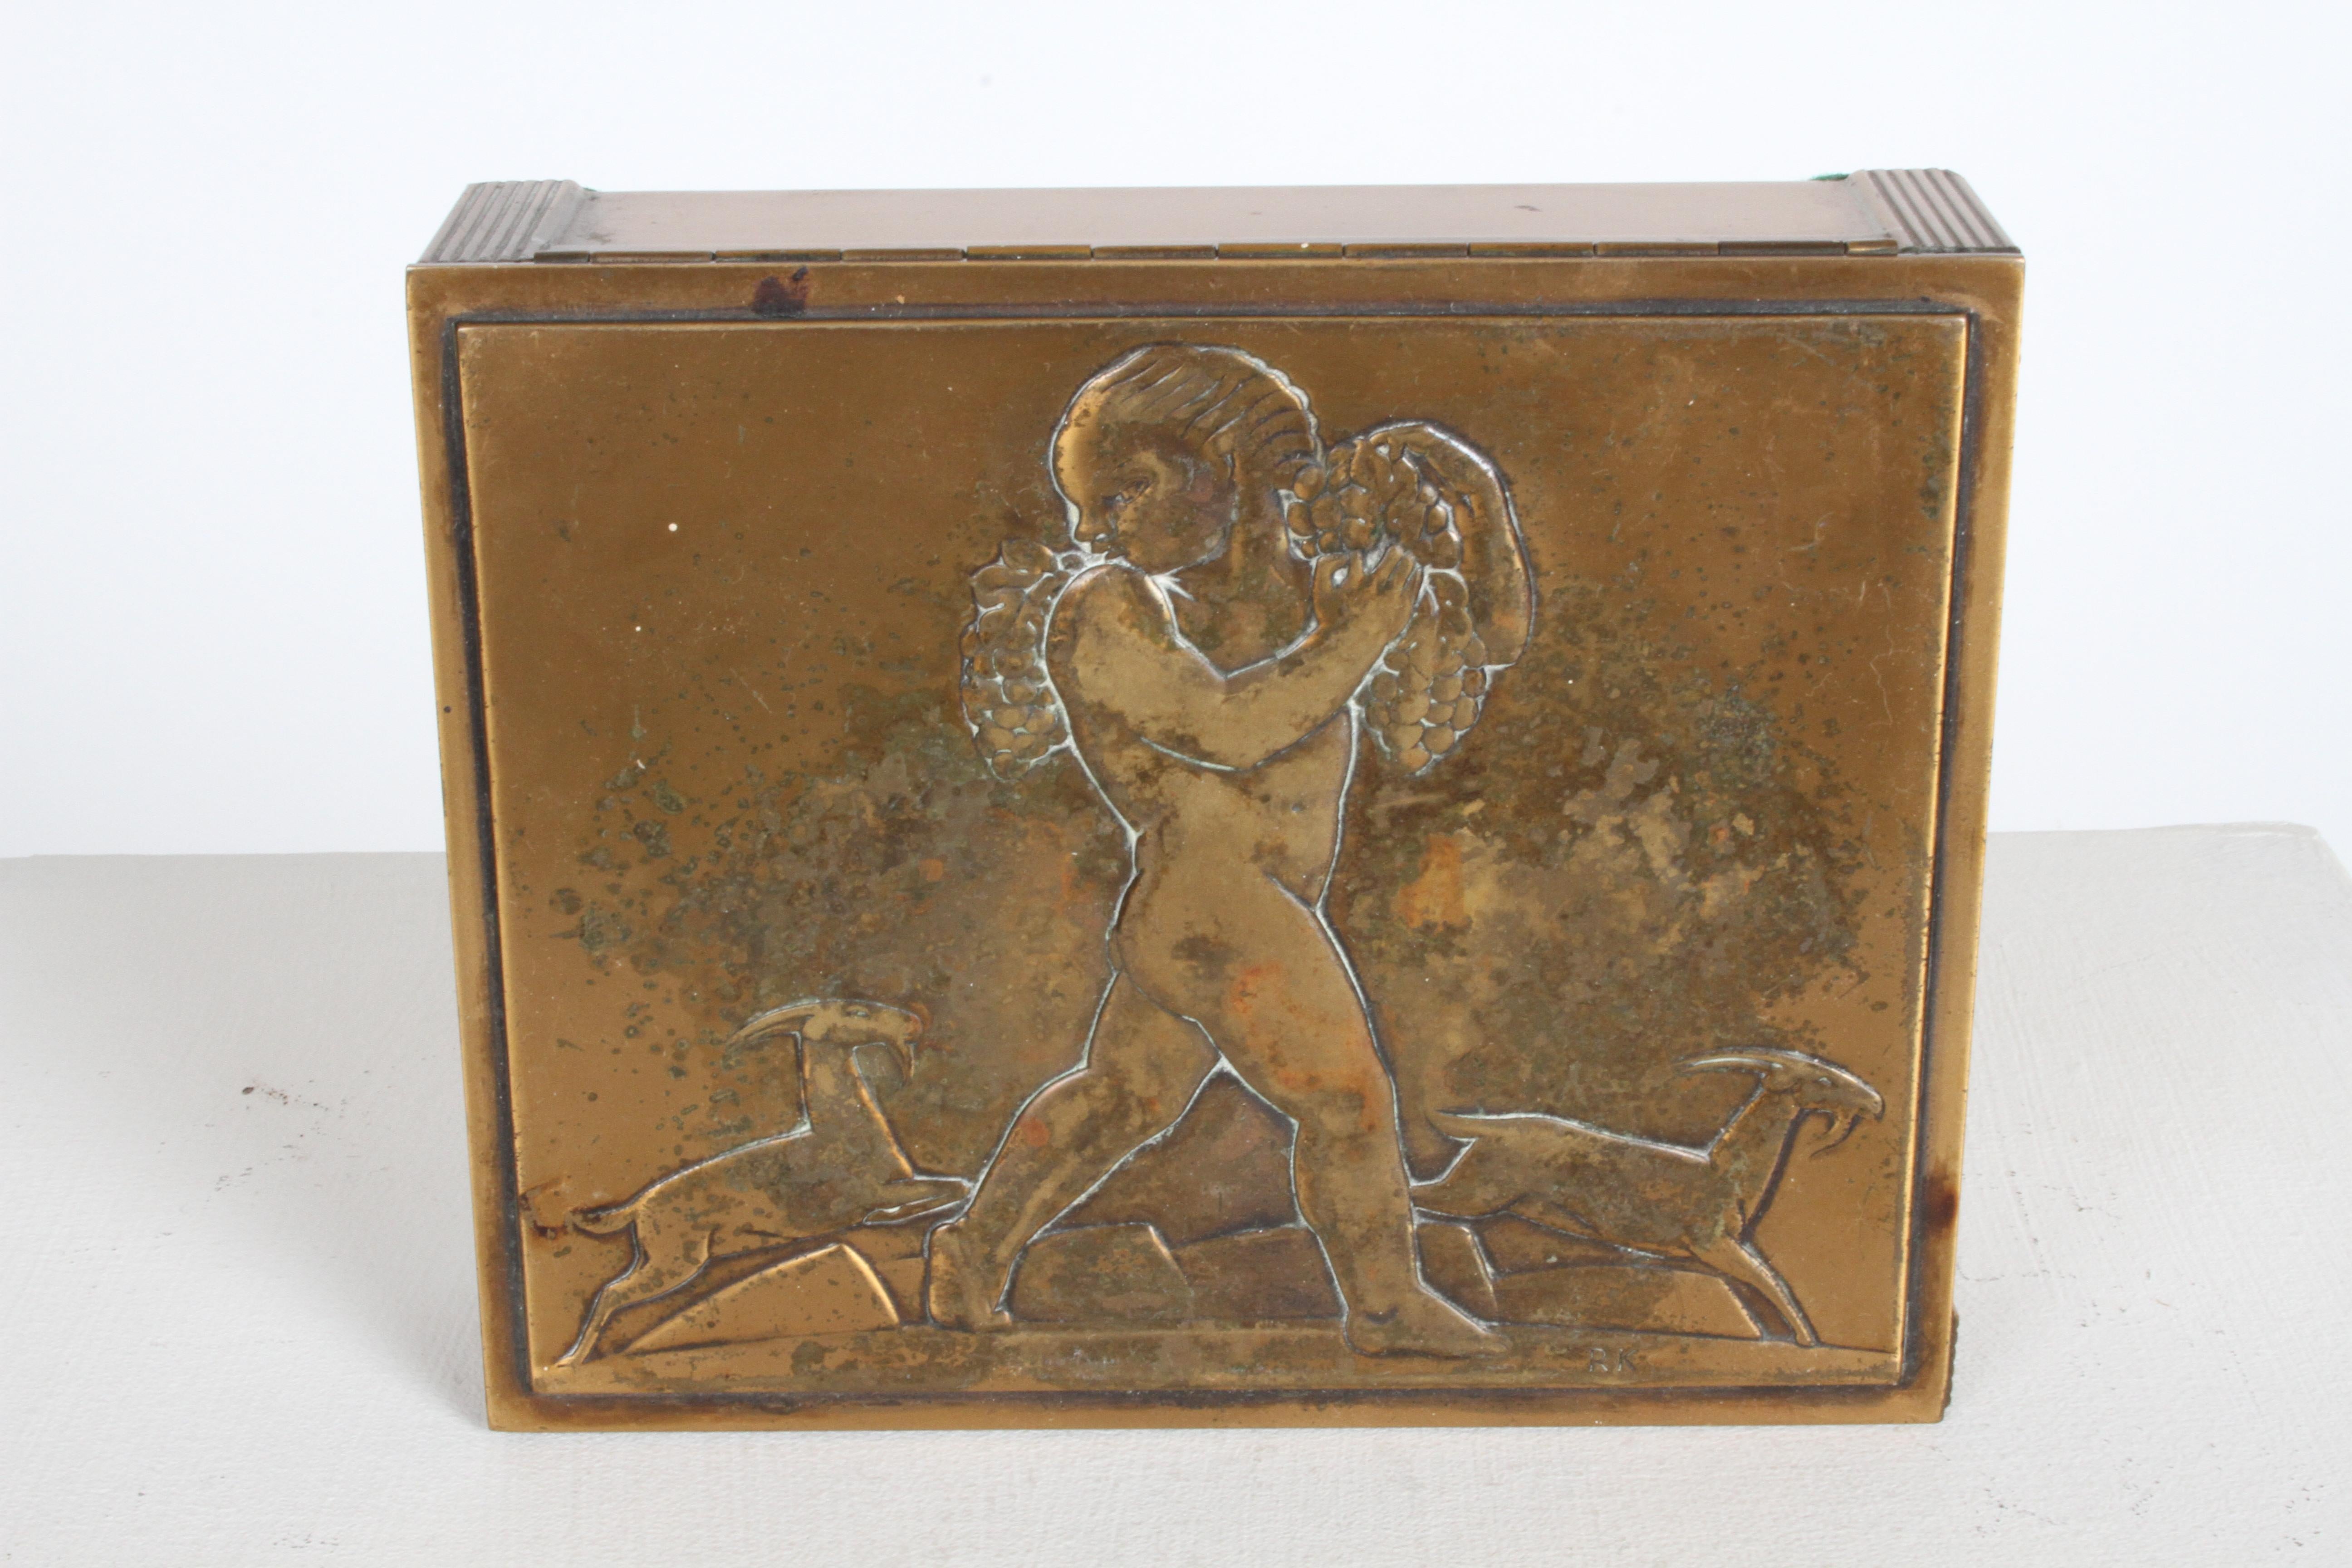 Rockwell Kent (American, 1882-1971) Rare Bacchus Art Deco copper cigarette box for Chase Chrome & Brass company, only offered in 1935 and 1936. 

Rockwell Kent designed only three items for chase, all with the same young Bacchus motiff, and all